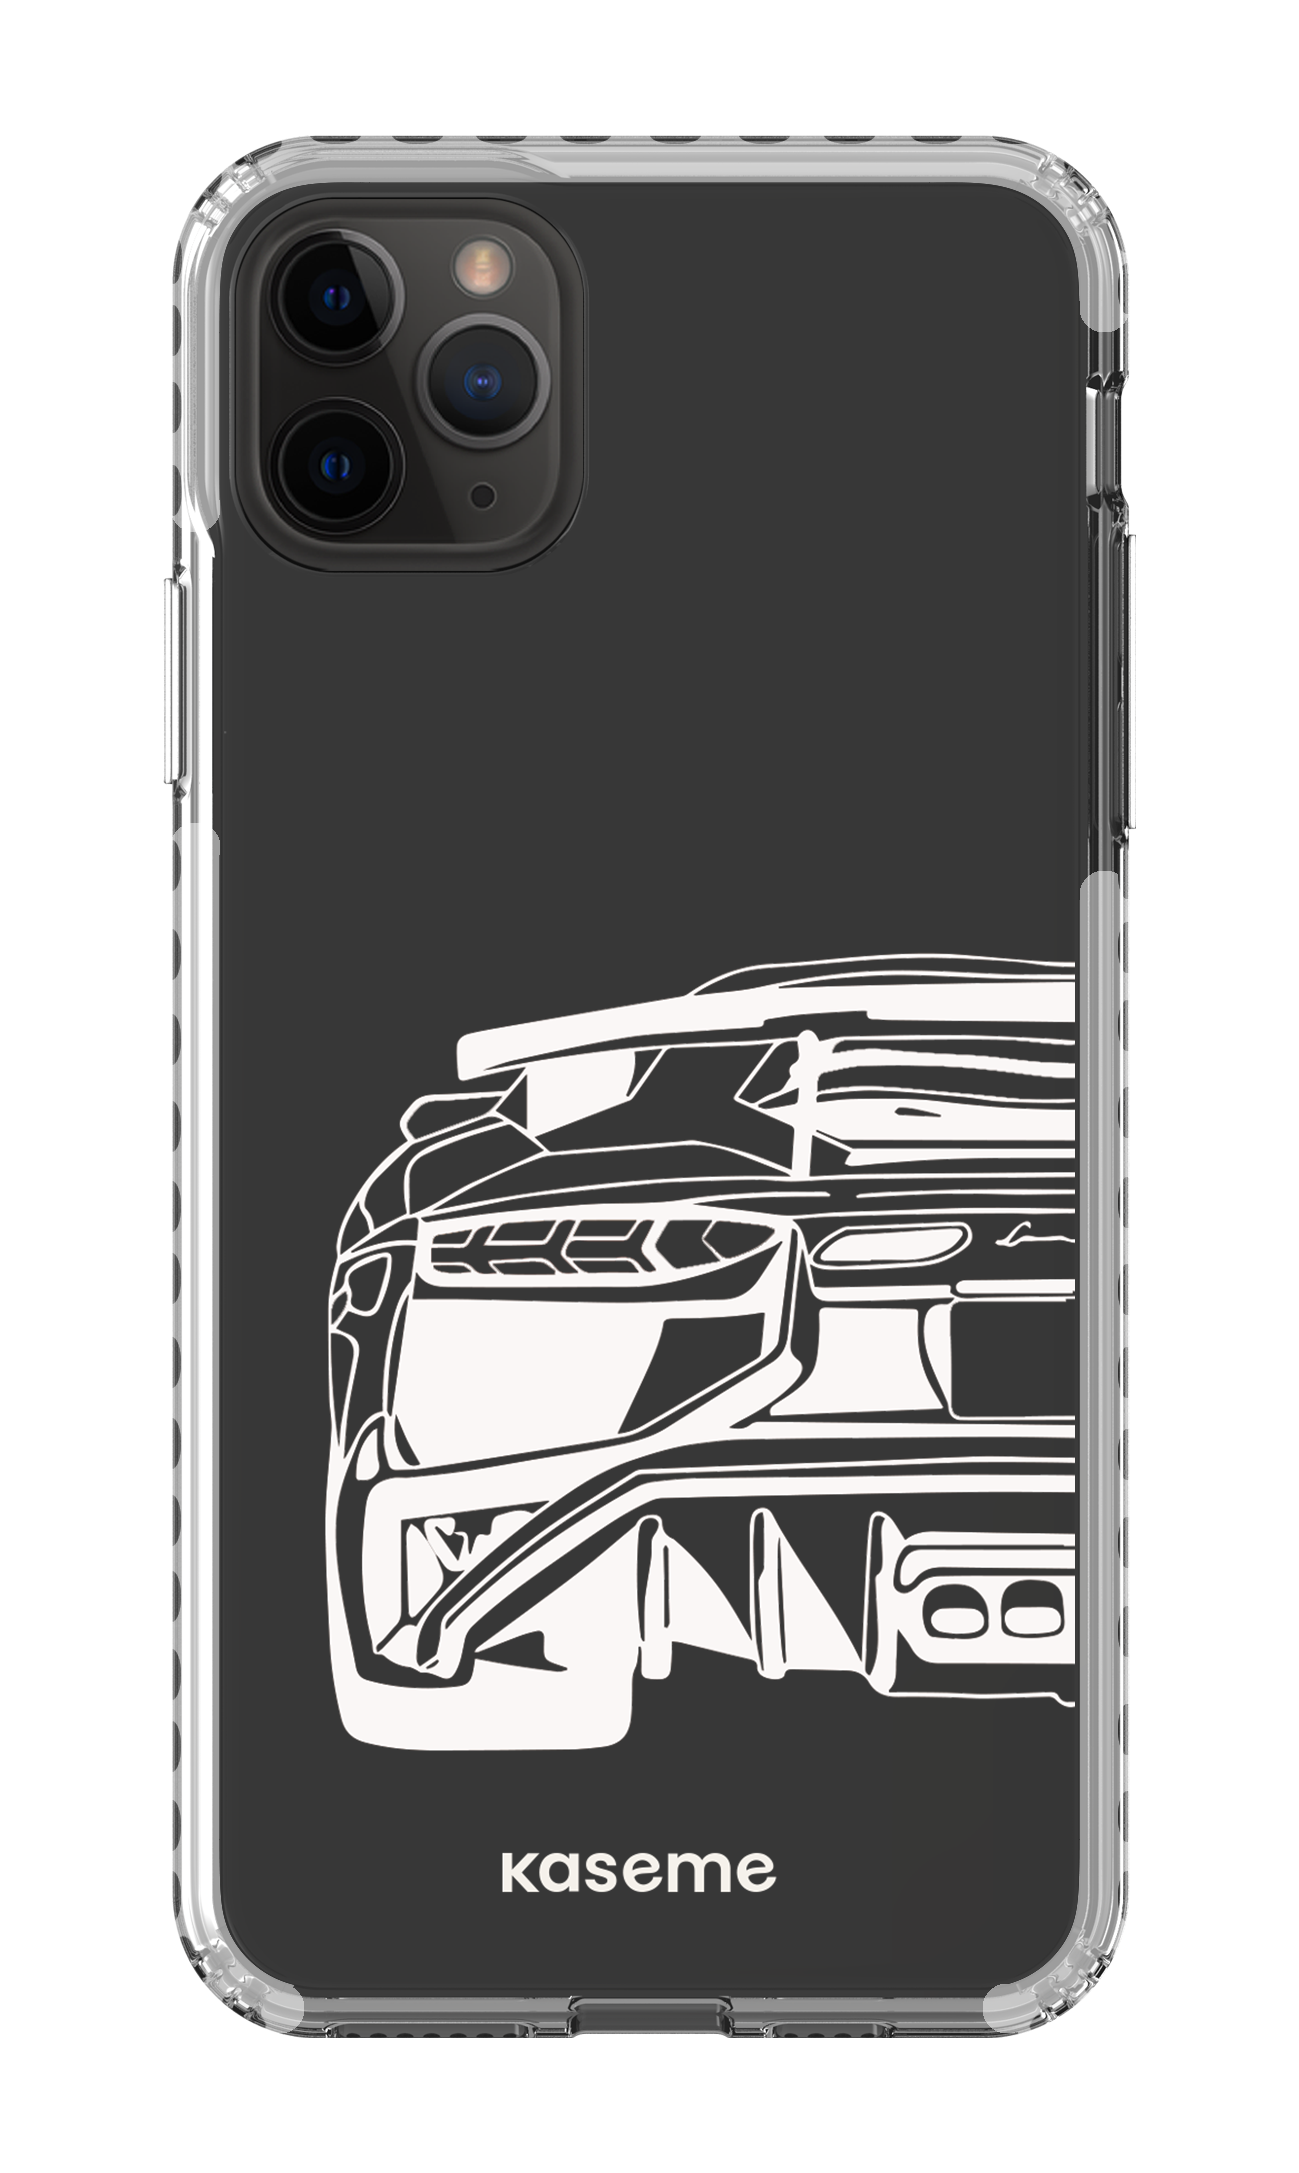 Lambo clear case - iPhone 11 pro Max